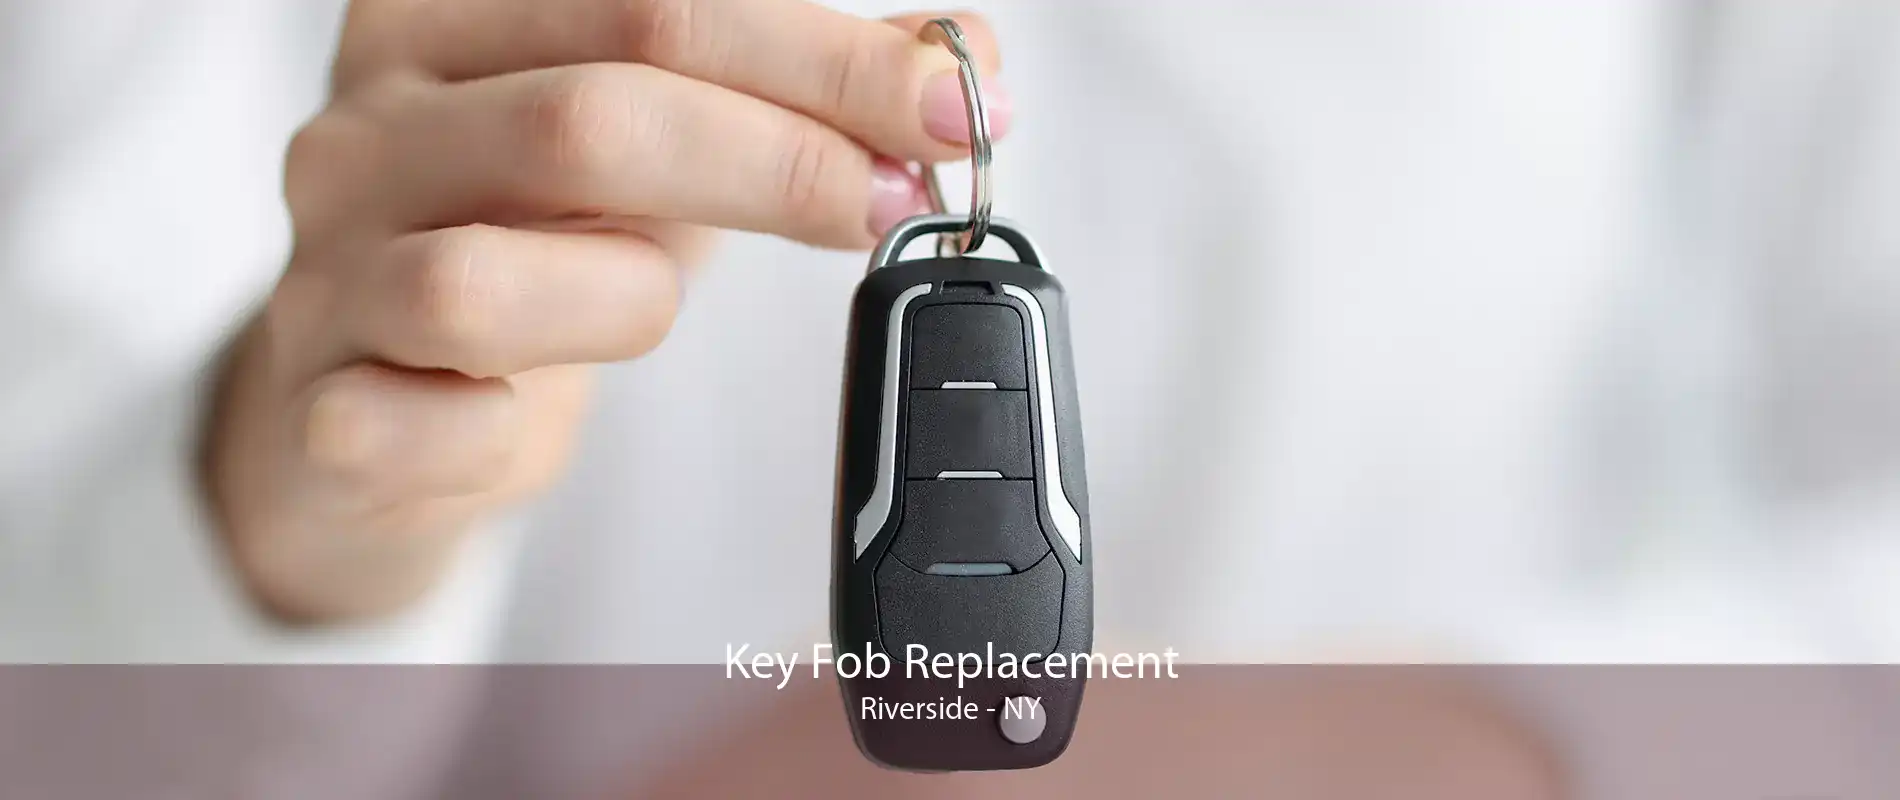 Key Fob Replacement Riverside - NY